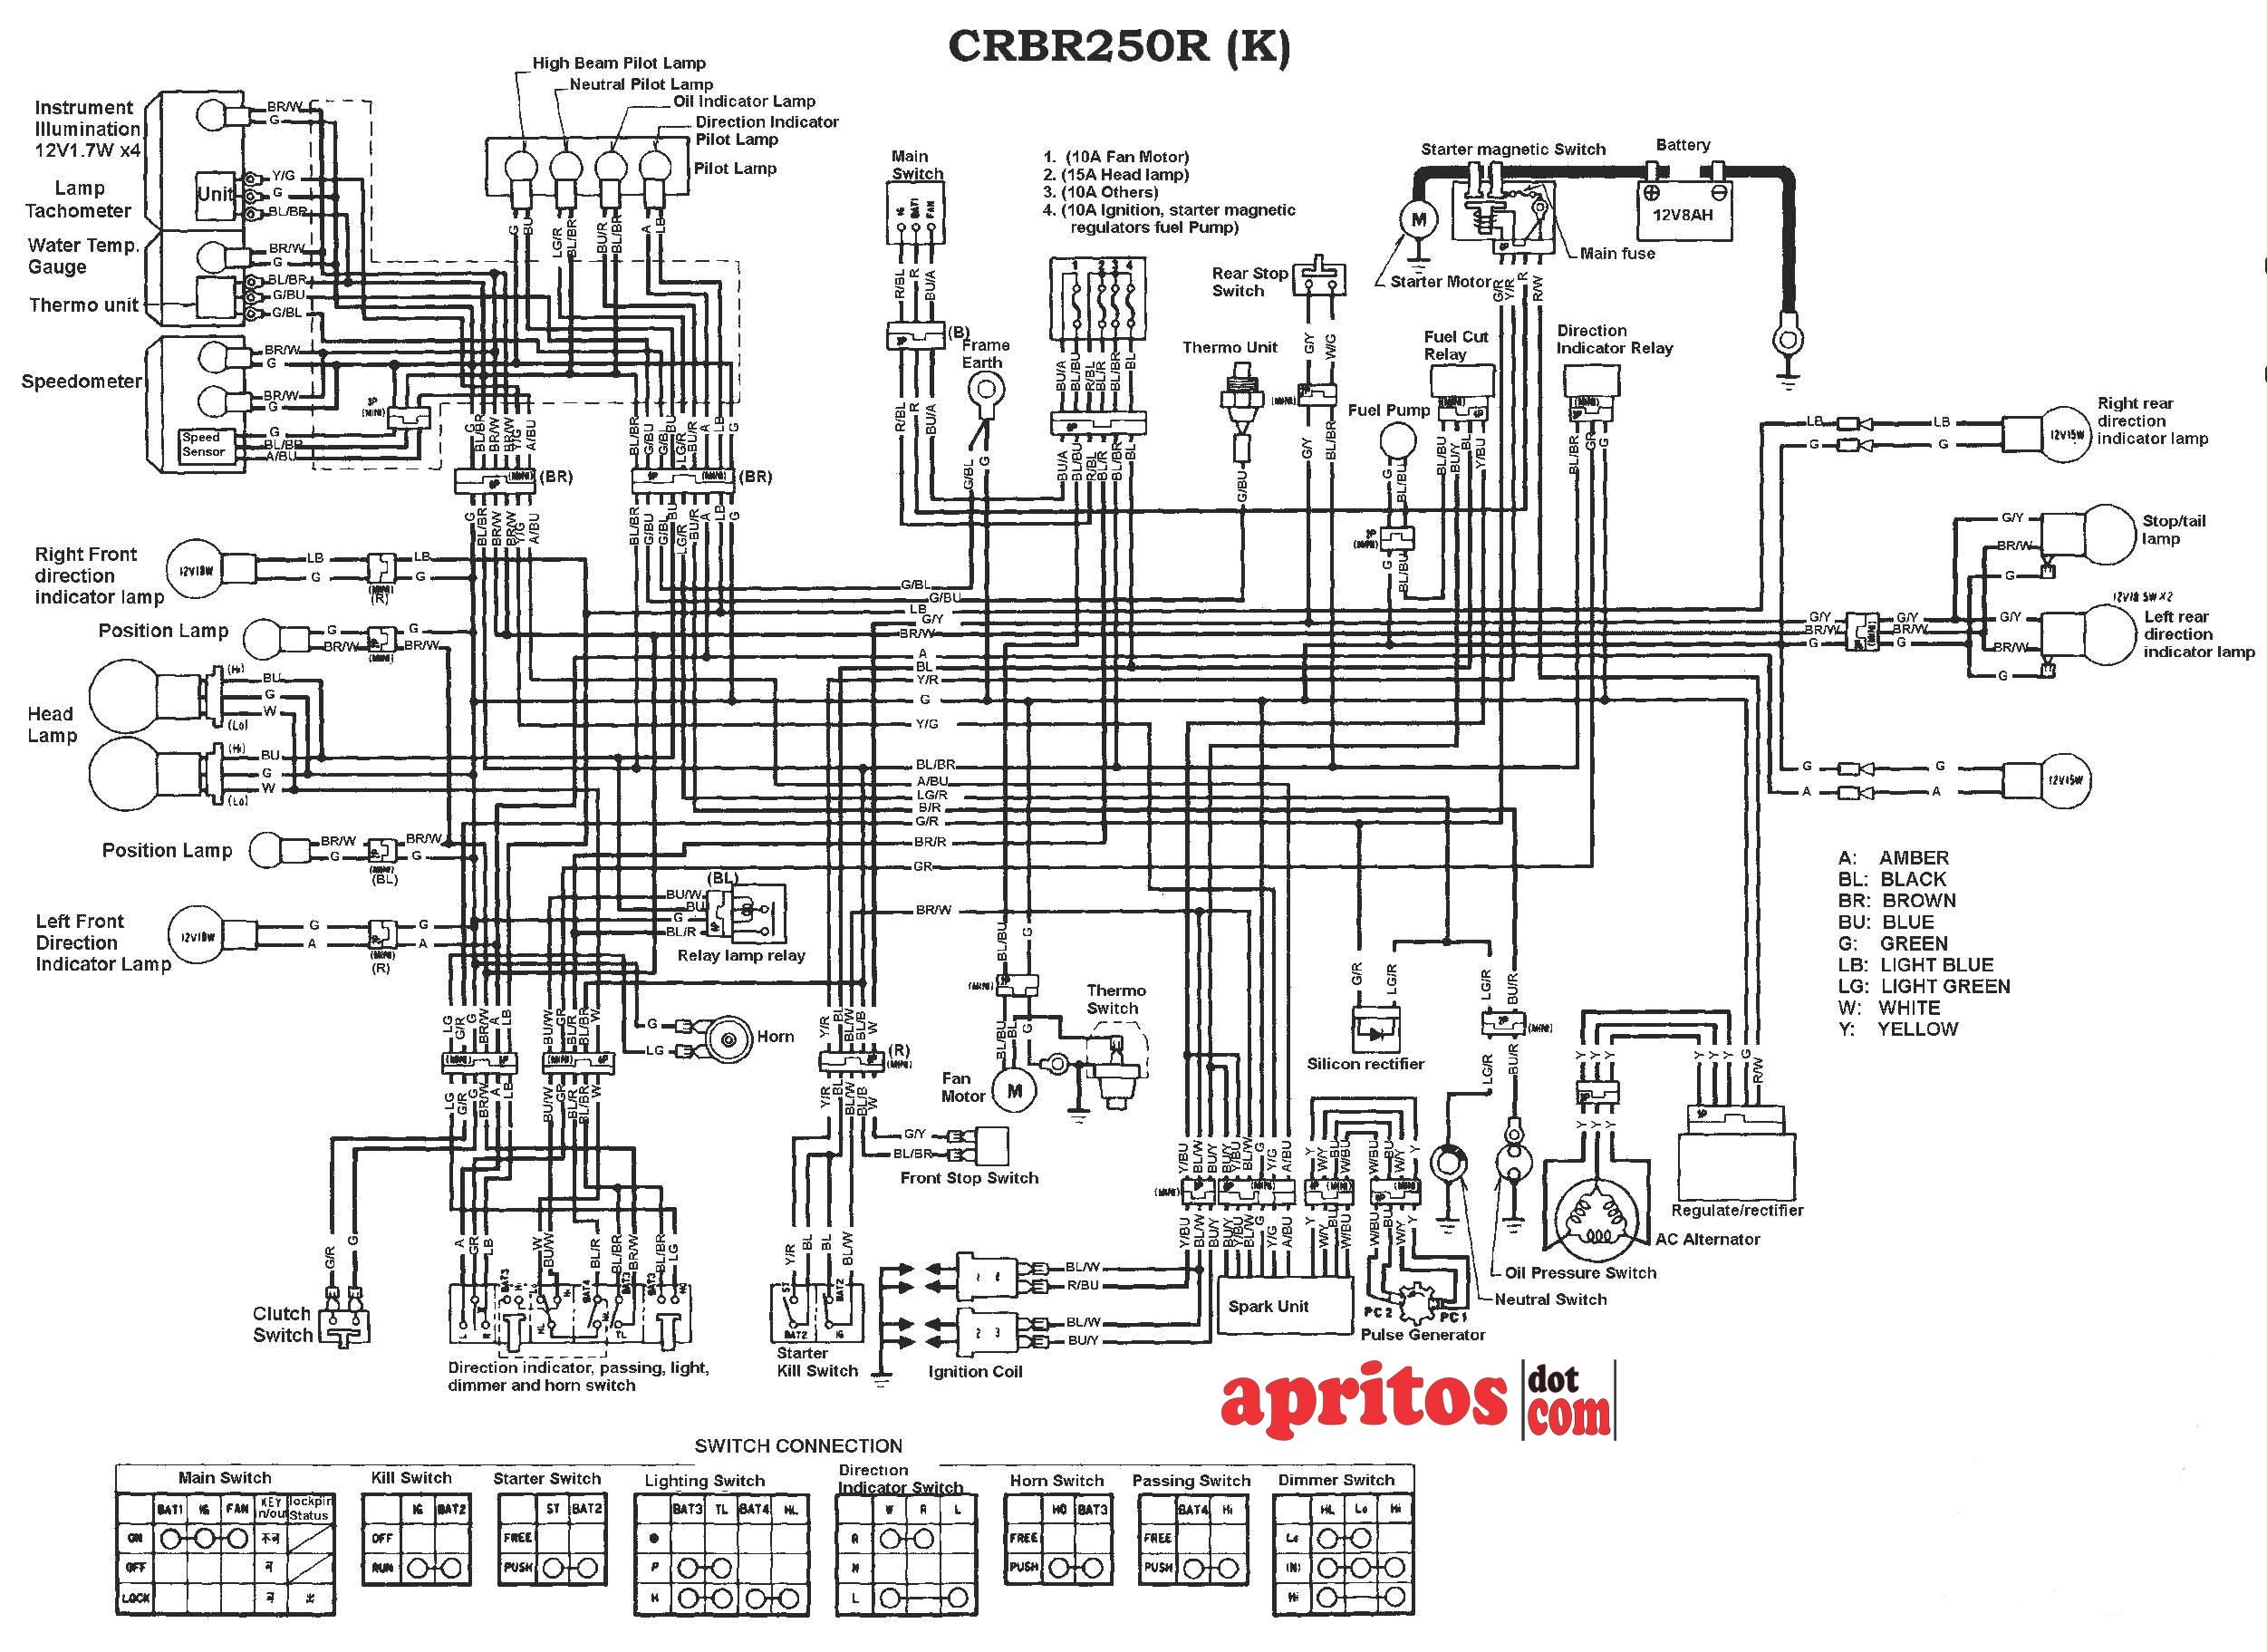 1986 Wire Digram ford Ignition Module Diagram] Honda Cbr 250 Wiring Diagram Full Version Hd Of 1986 Wire Digram ford Ignition Module